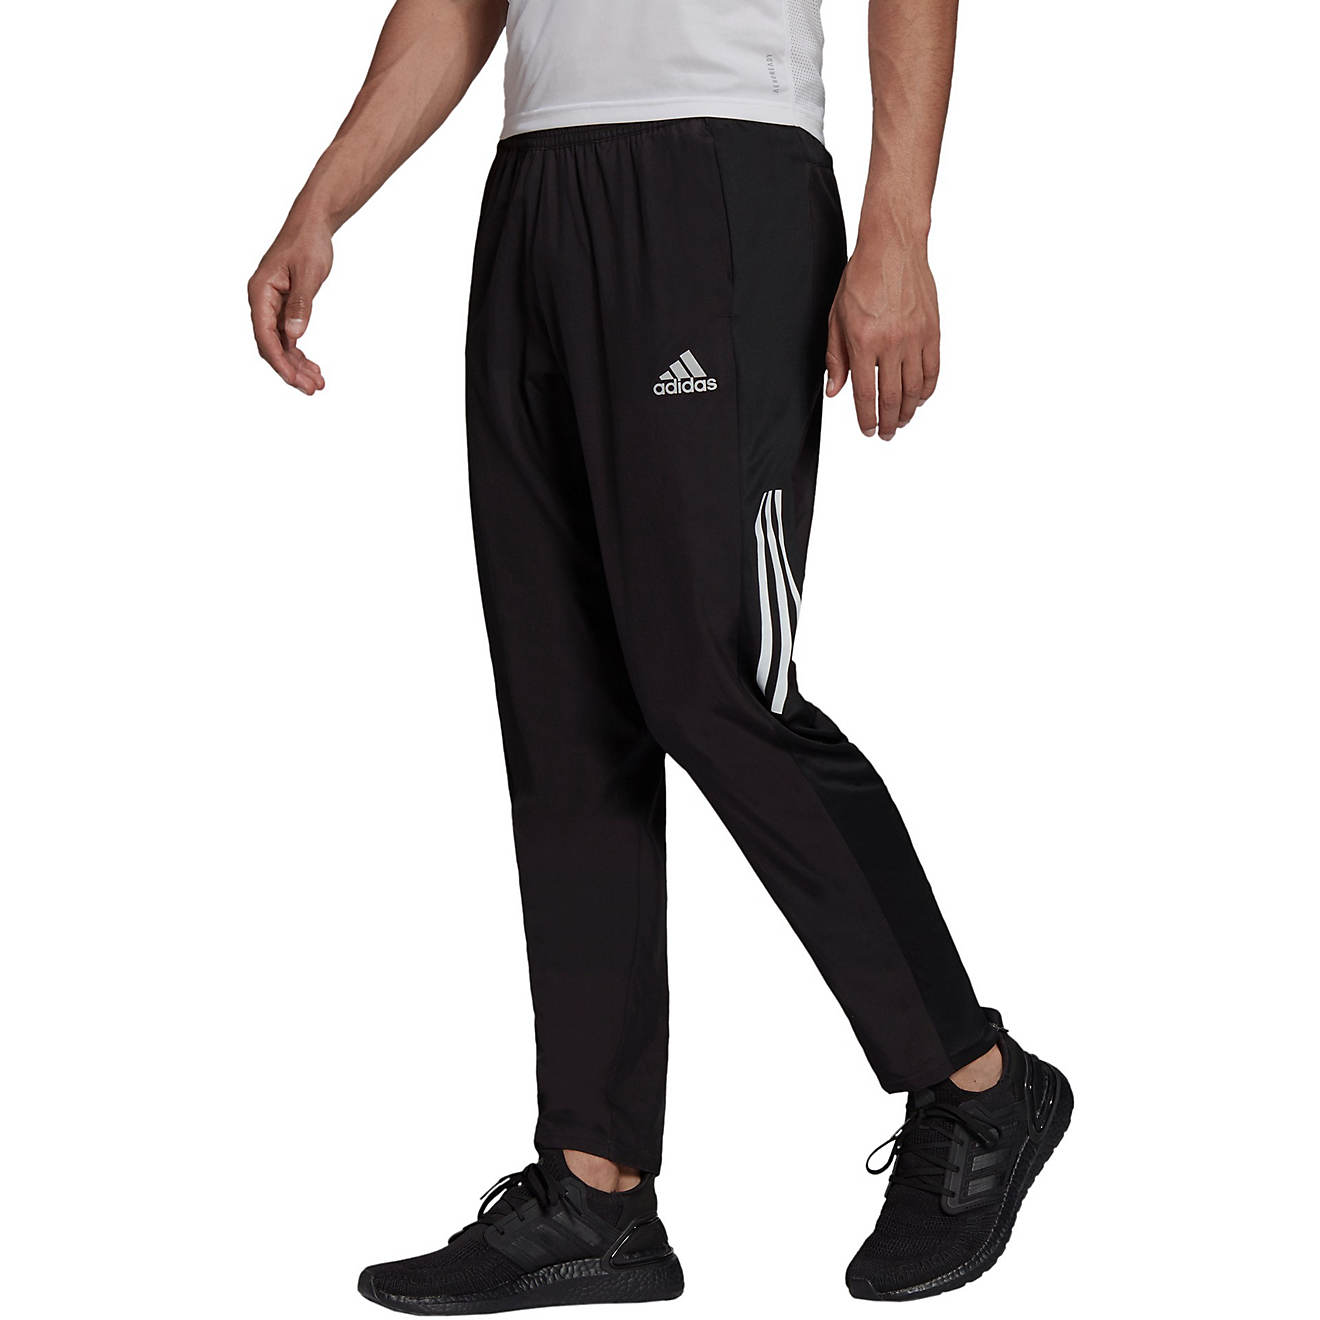 adidas Men's OTR Astro Wind Pants | Free Shipping at Academy